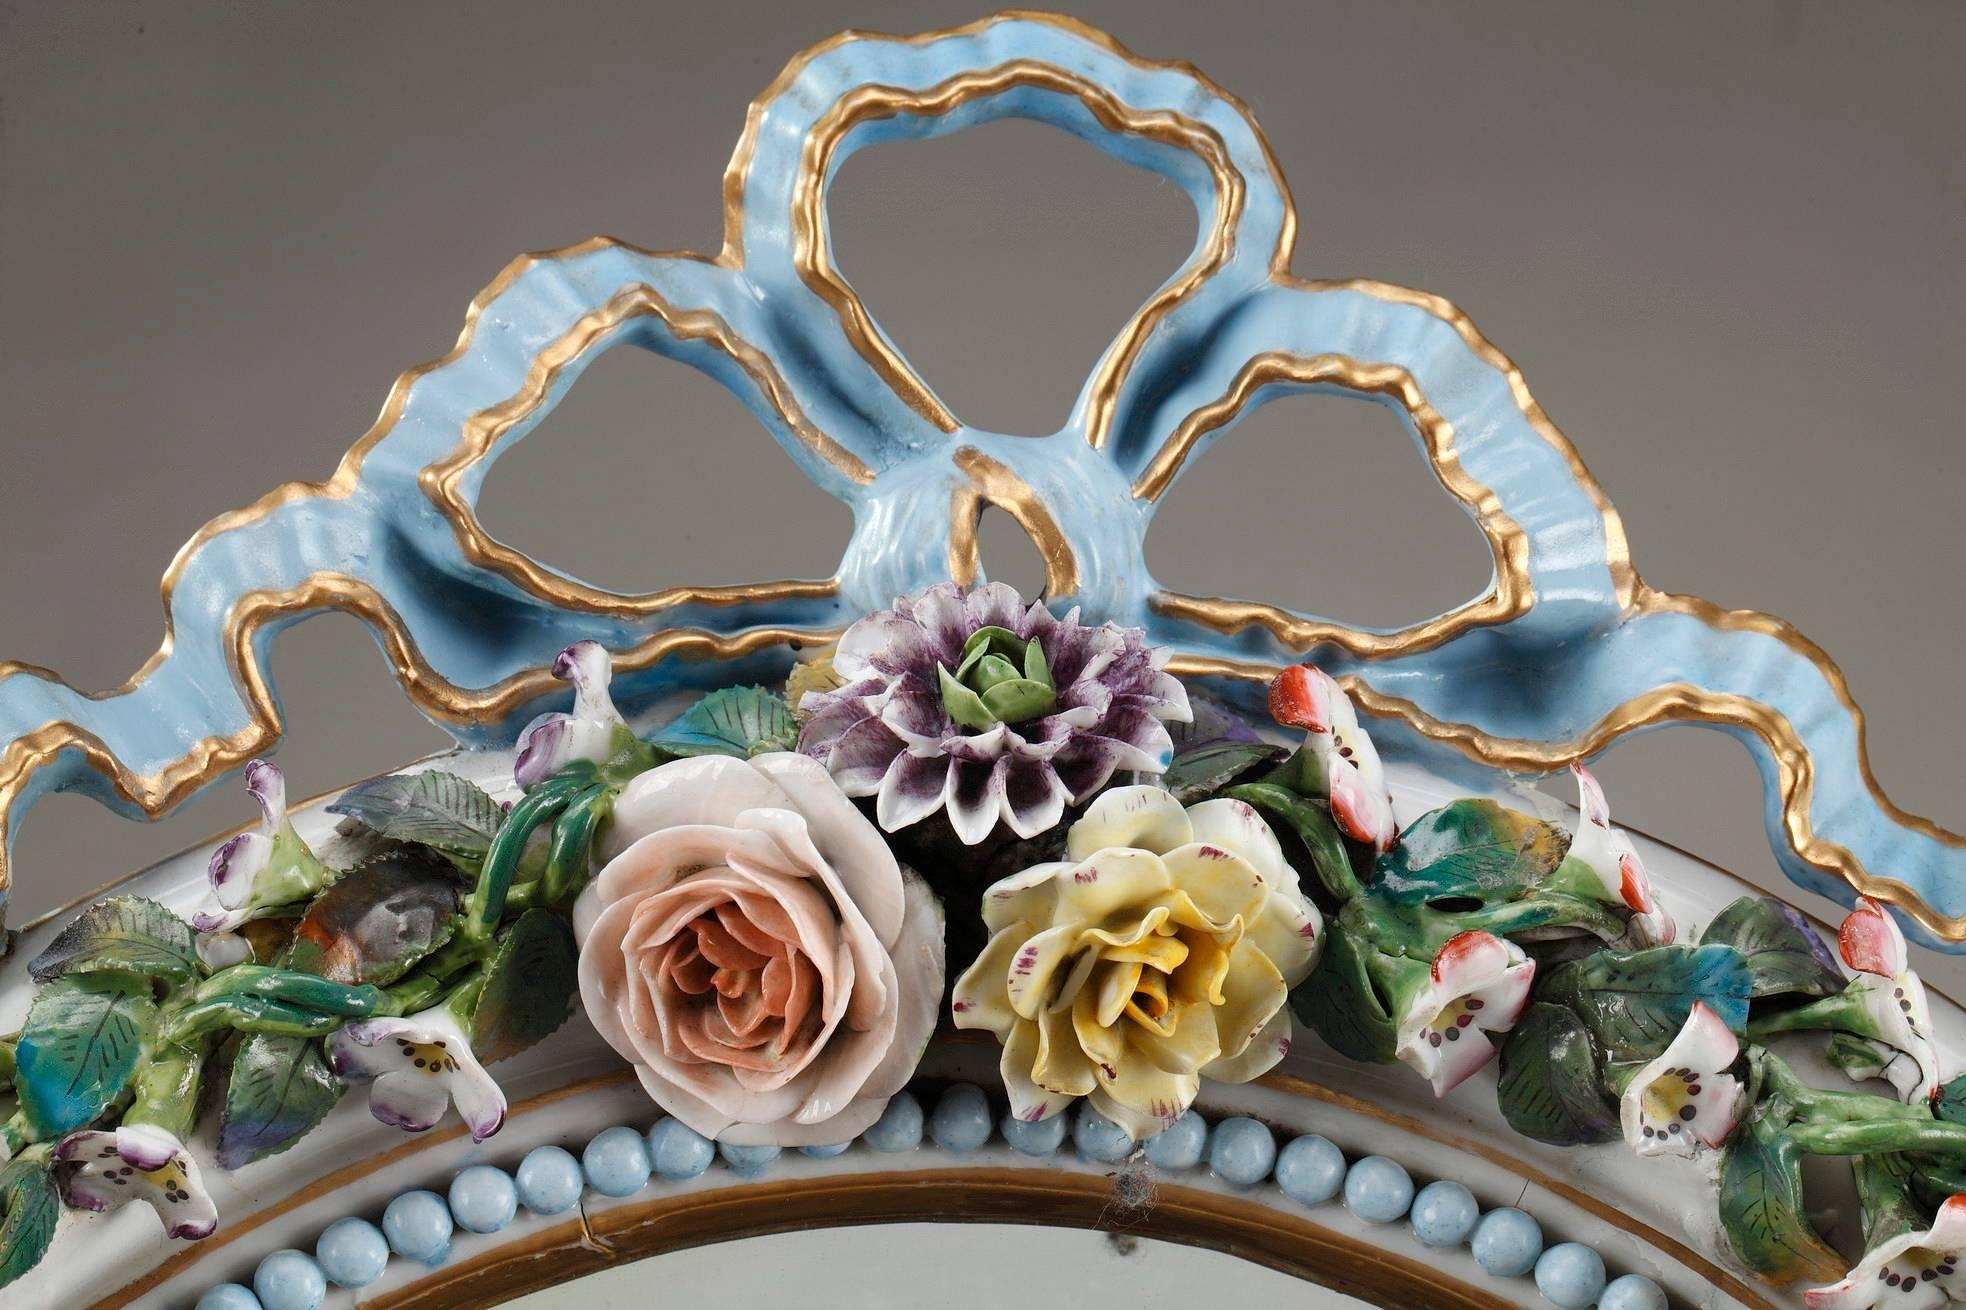 French mirror crafted of porcelain in Meissen taste. Exquisitely painted in polychrome with gilt accents, the bountiful frame is adorned with Rococo decoration, composed of a wide variety of highly detailed flowers and a frieze of pearls. It is